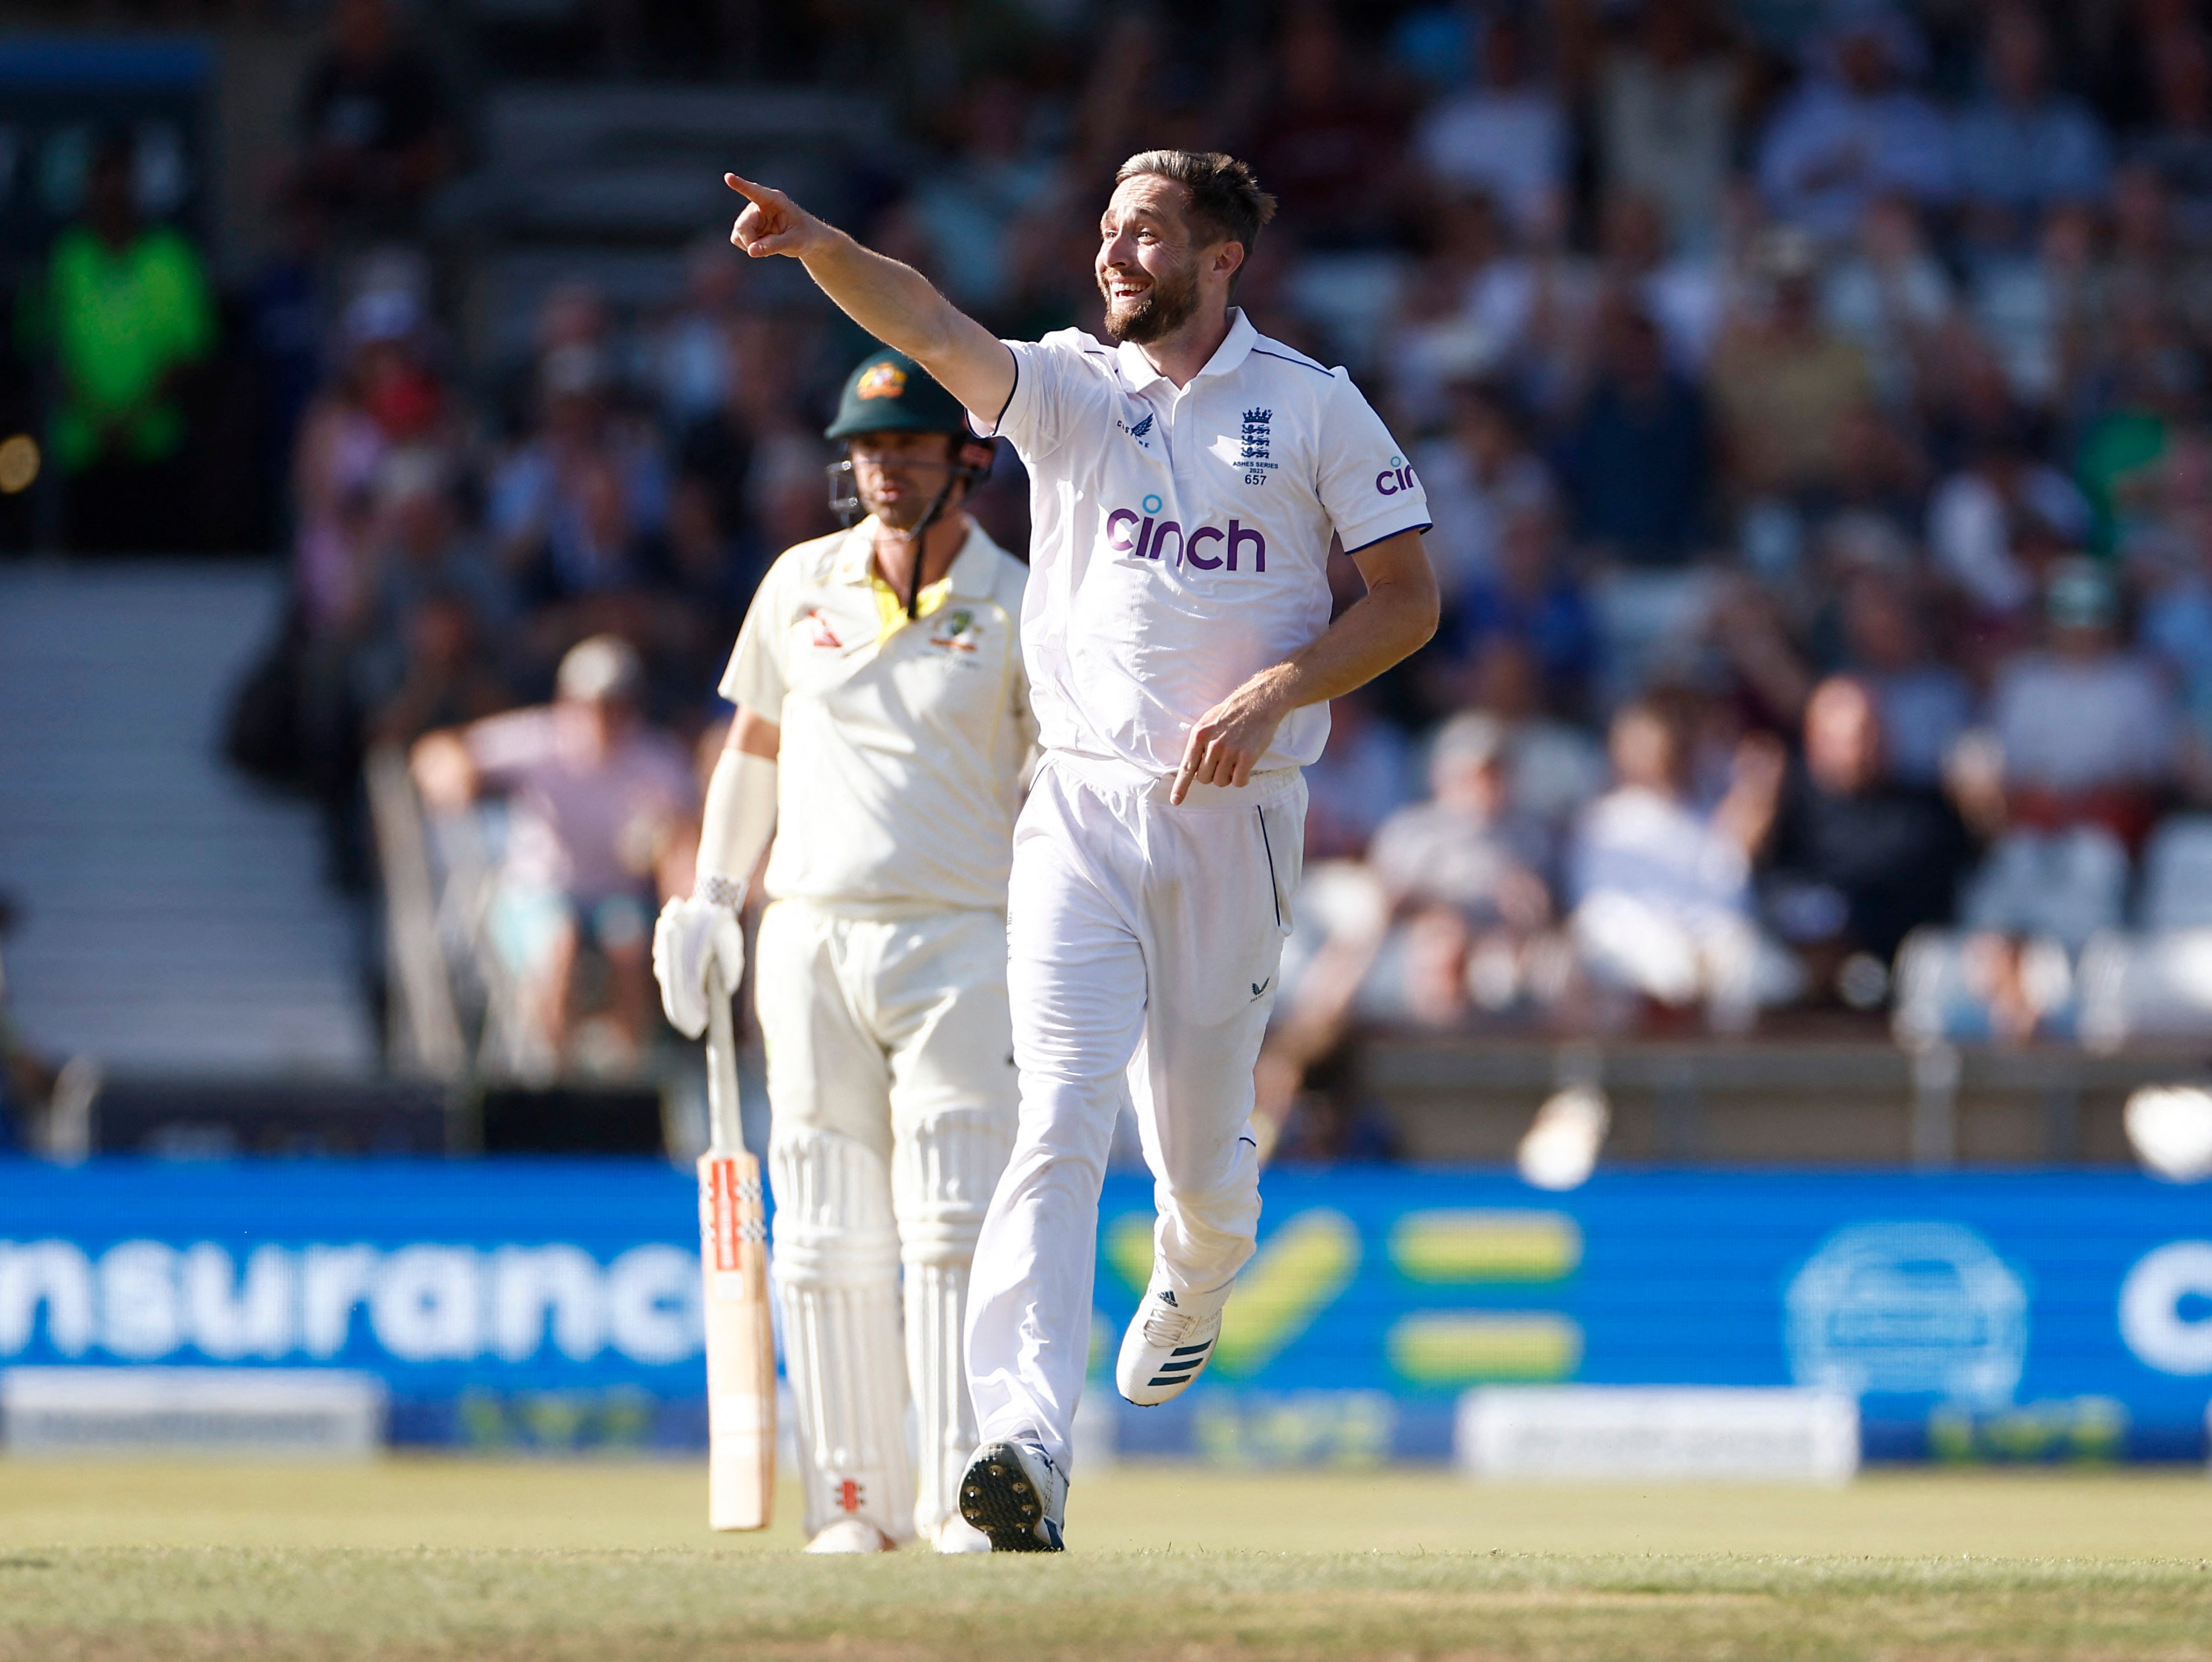 Chris Woakes dismissed the dangerous Usman Khawaja late in the day